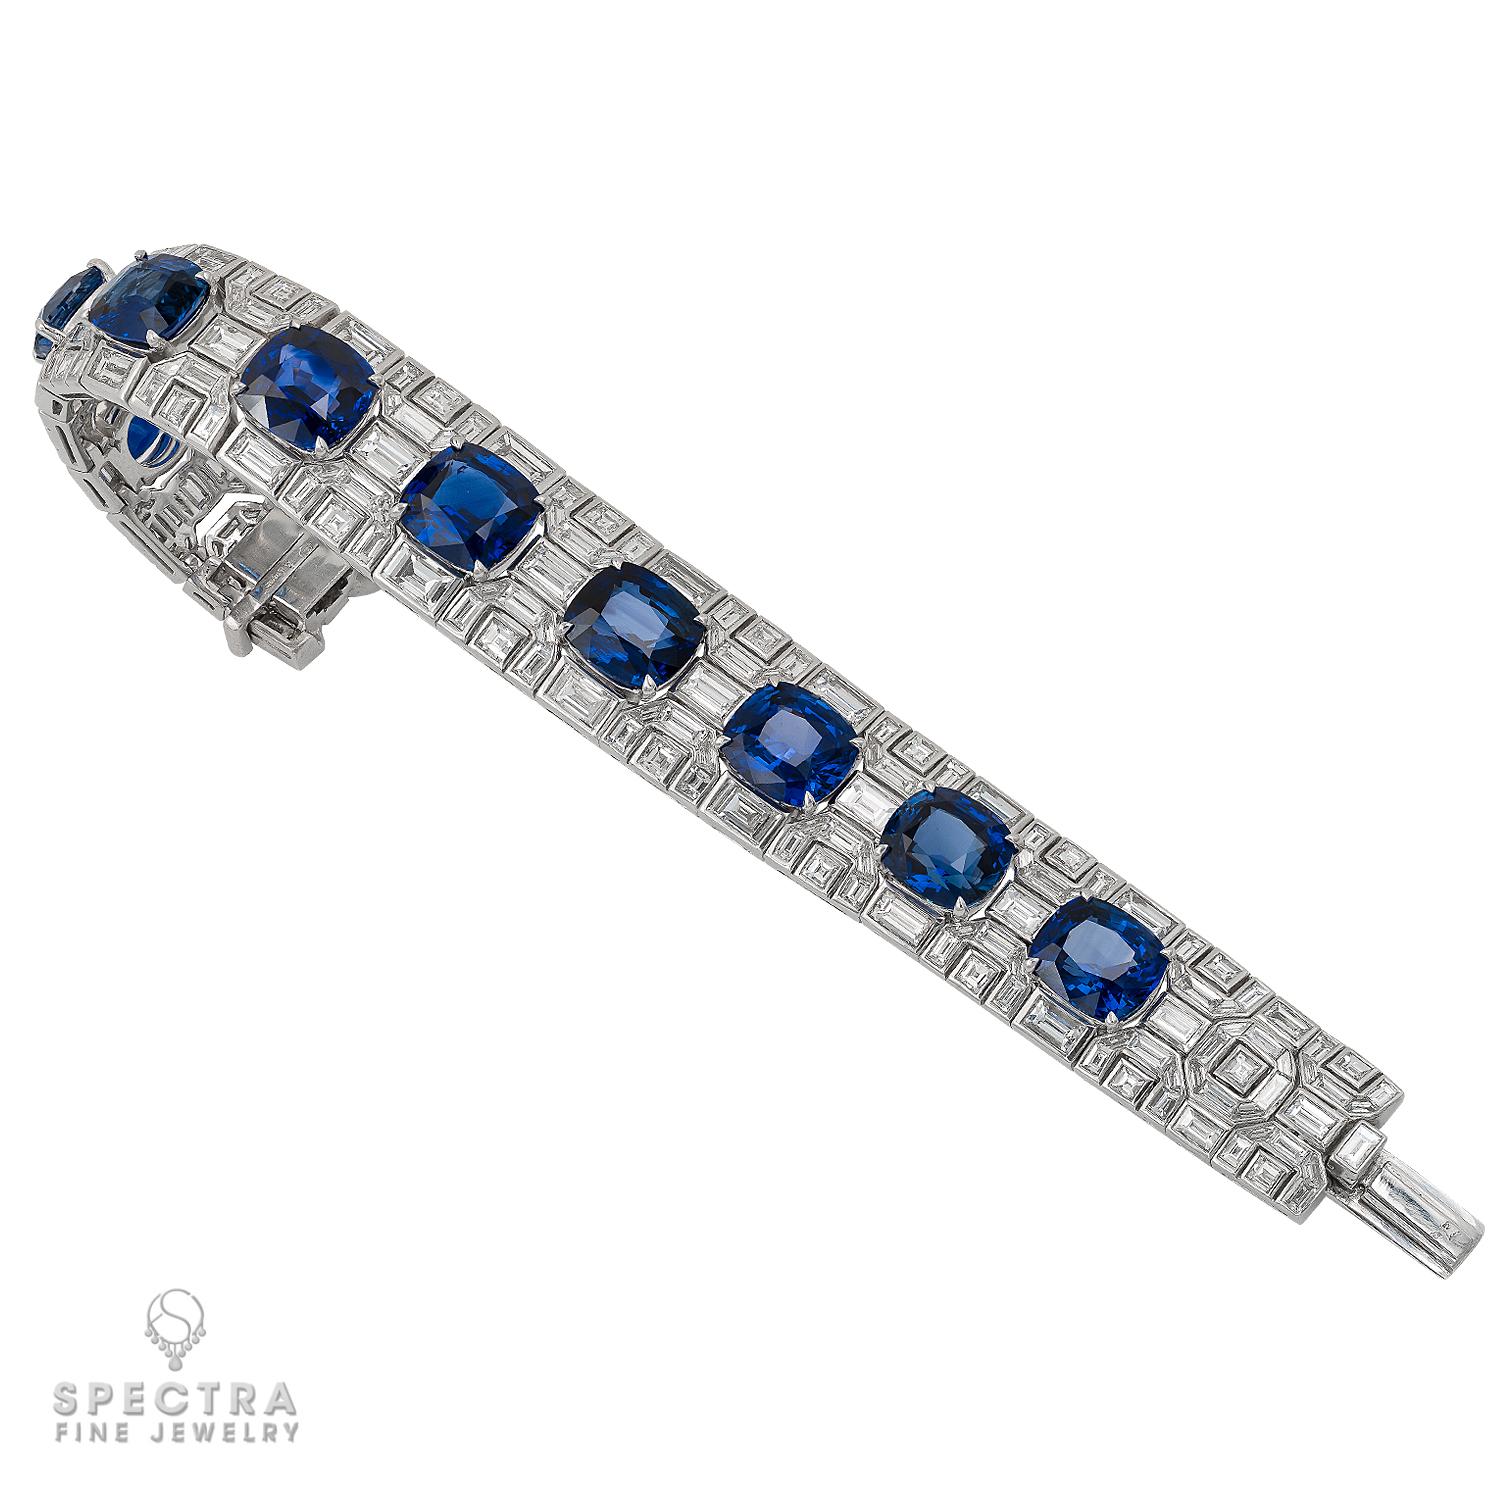 The juxtaposed geometric links, which evoke the unique pavements in the streets of Rome itself, lay the groundwork for this graphic Bulgari Sapphire Diamond Bracelet, made in Italy in the 20th century, circa 1980. Crafted in platinum, set with